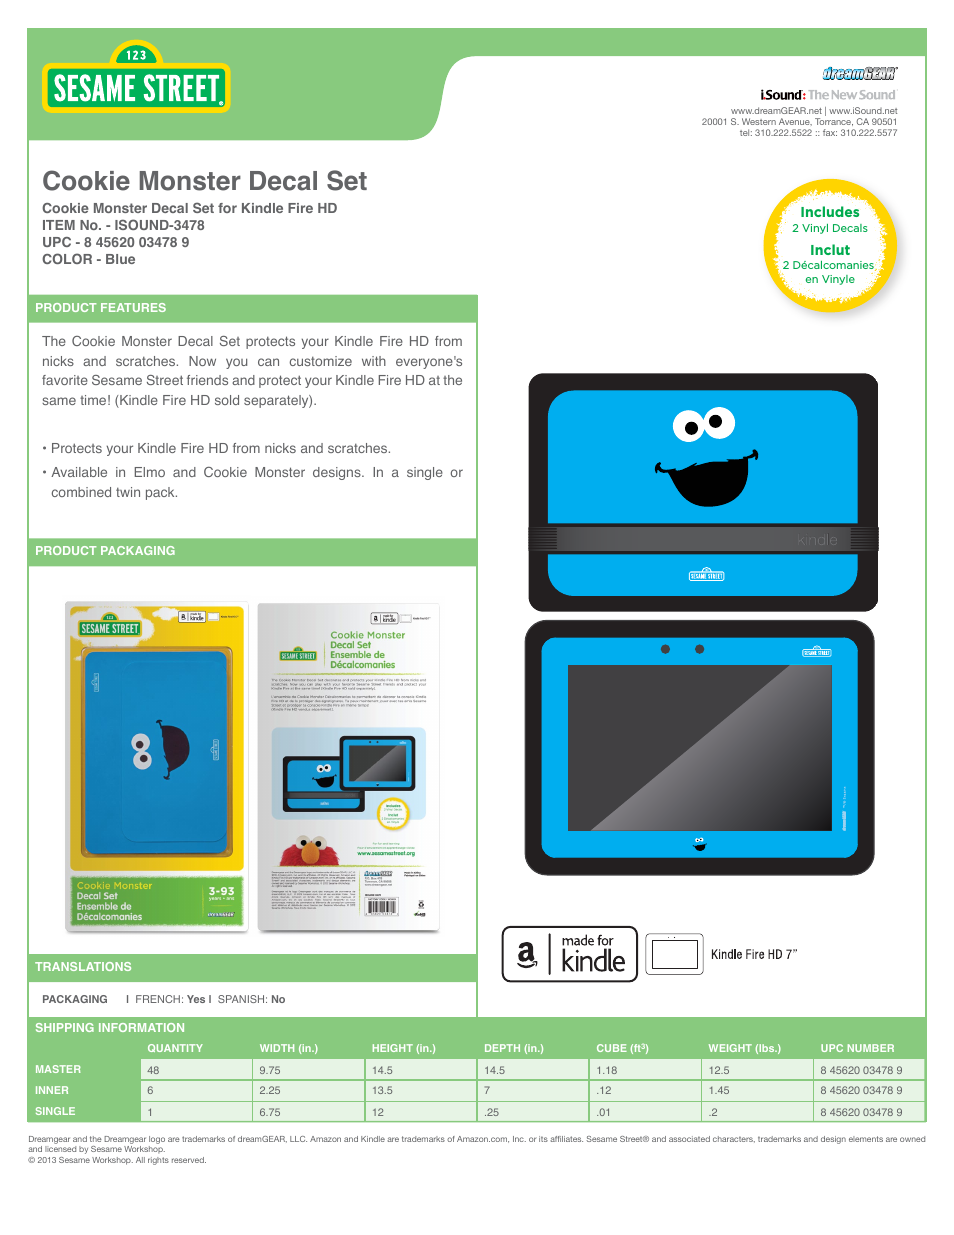 Cookie Monster Decal Set for Kindle Fire HD - Sell Sheet